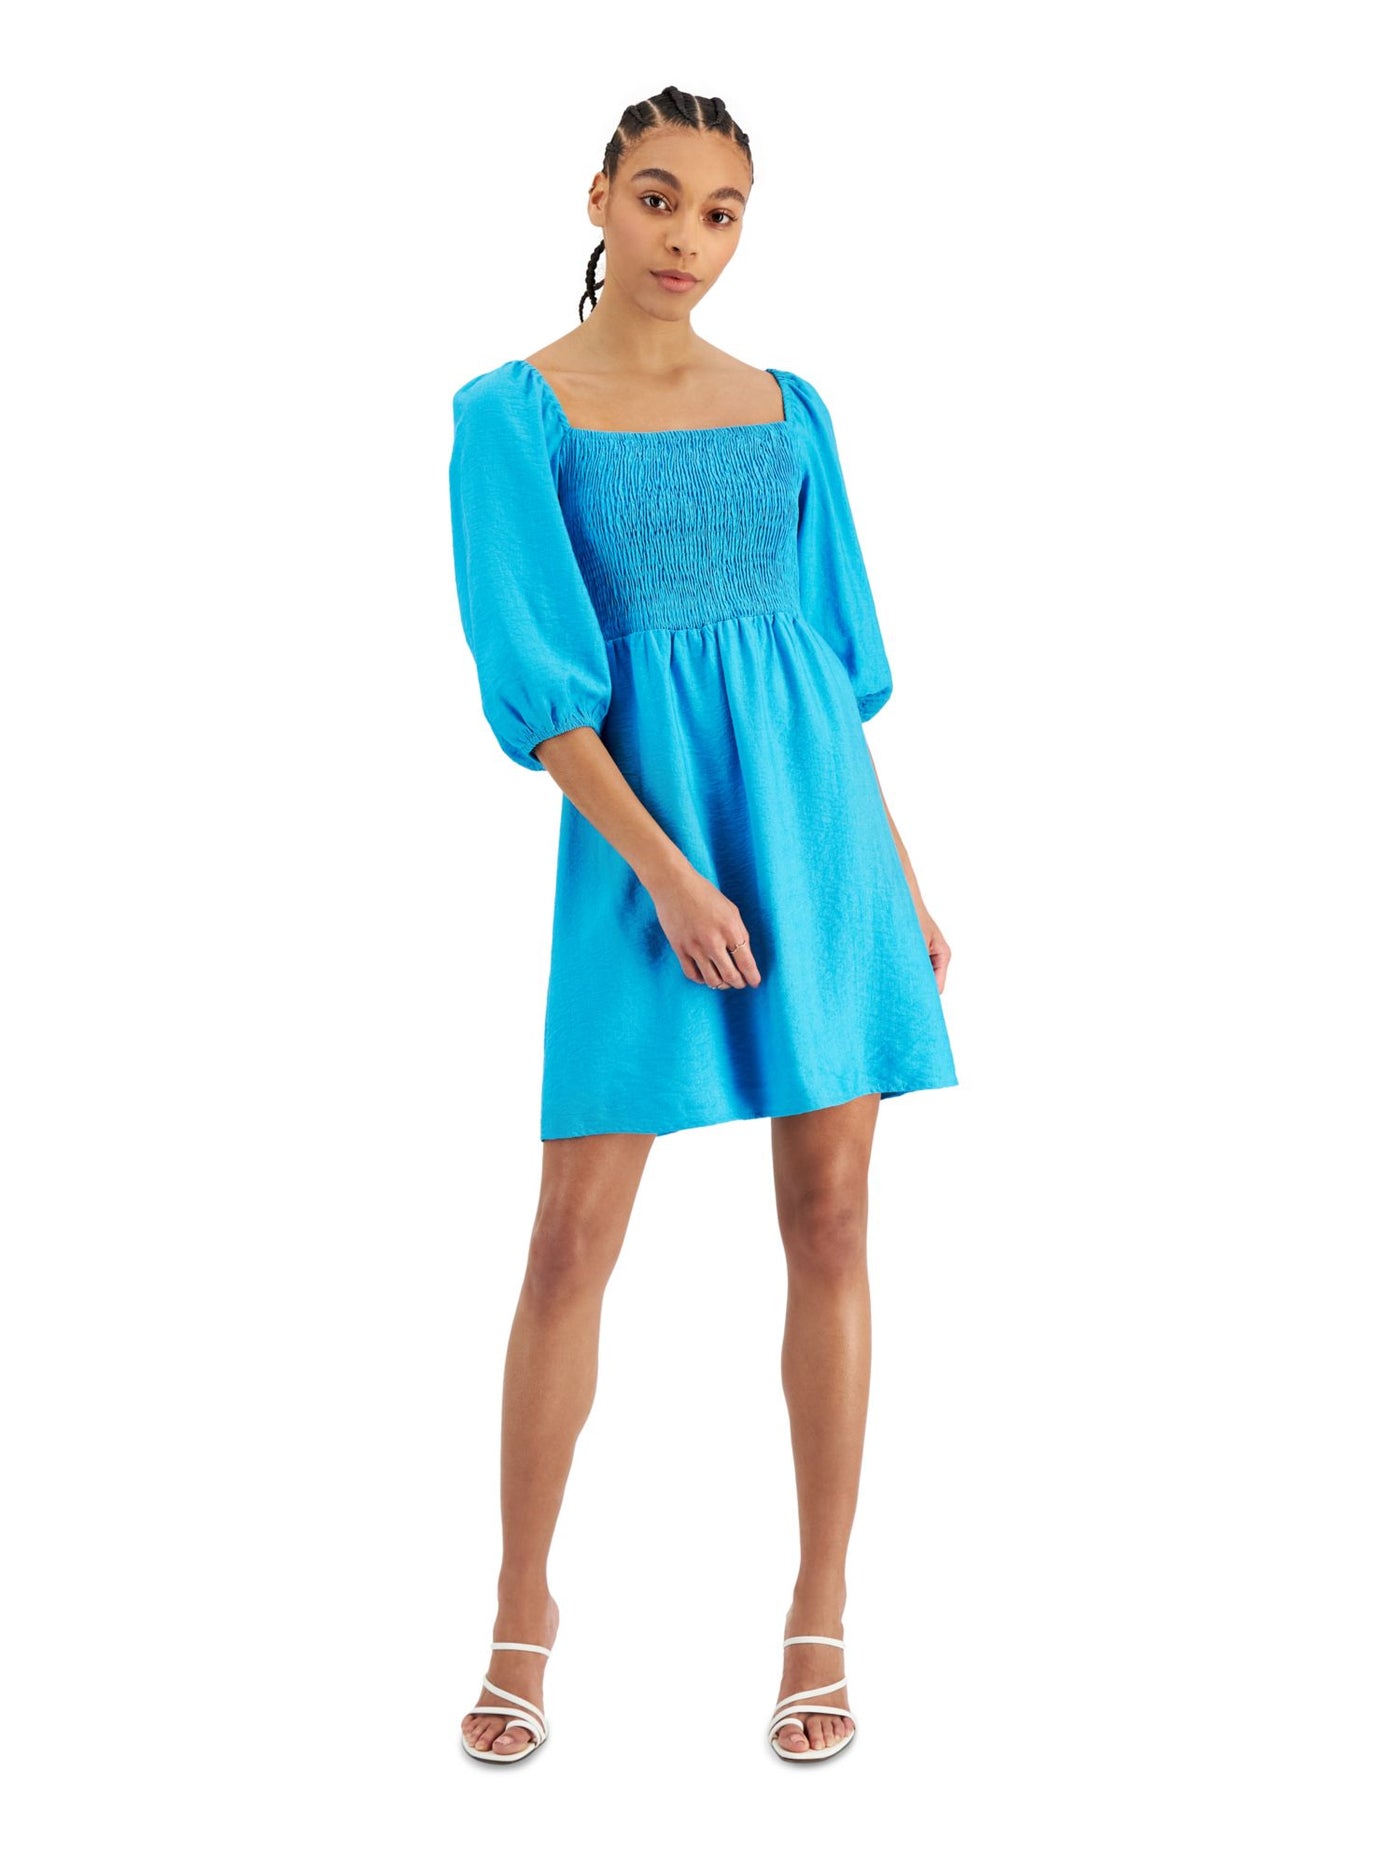 BAR III Womens Blue Smocked Textured Elastic Cuffs Pouf Sleeve Square Neck Short Fit + Flare Dress L